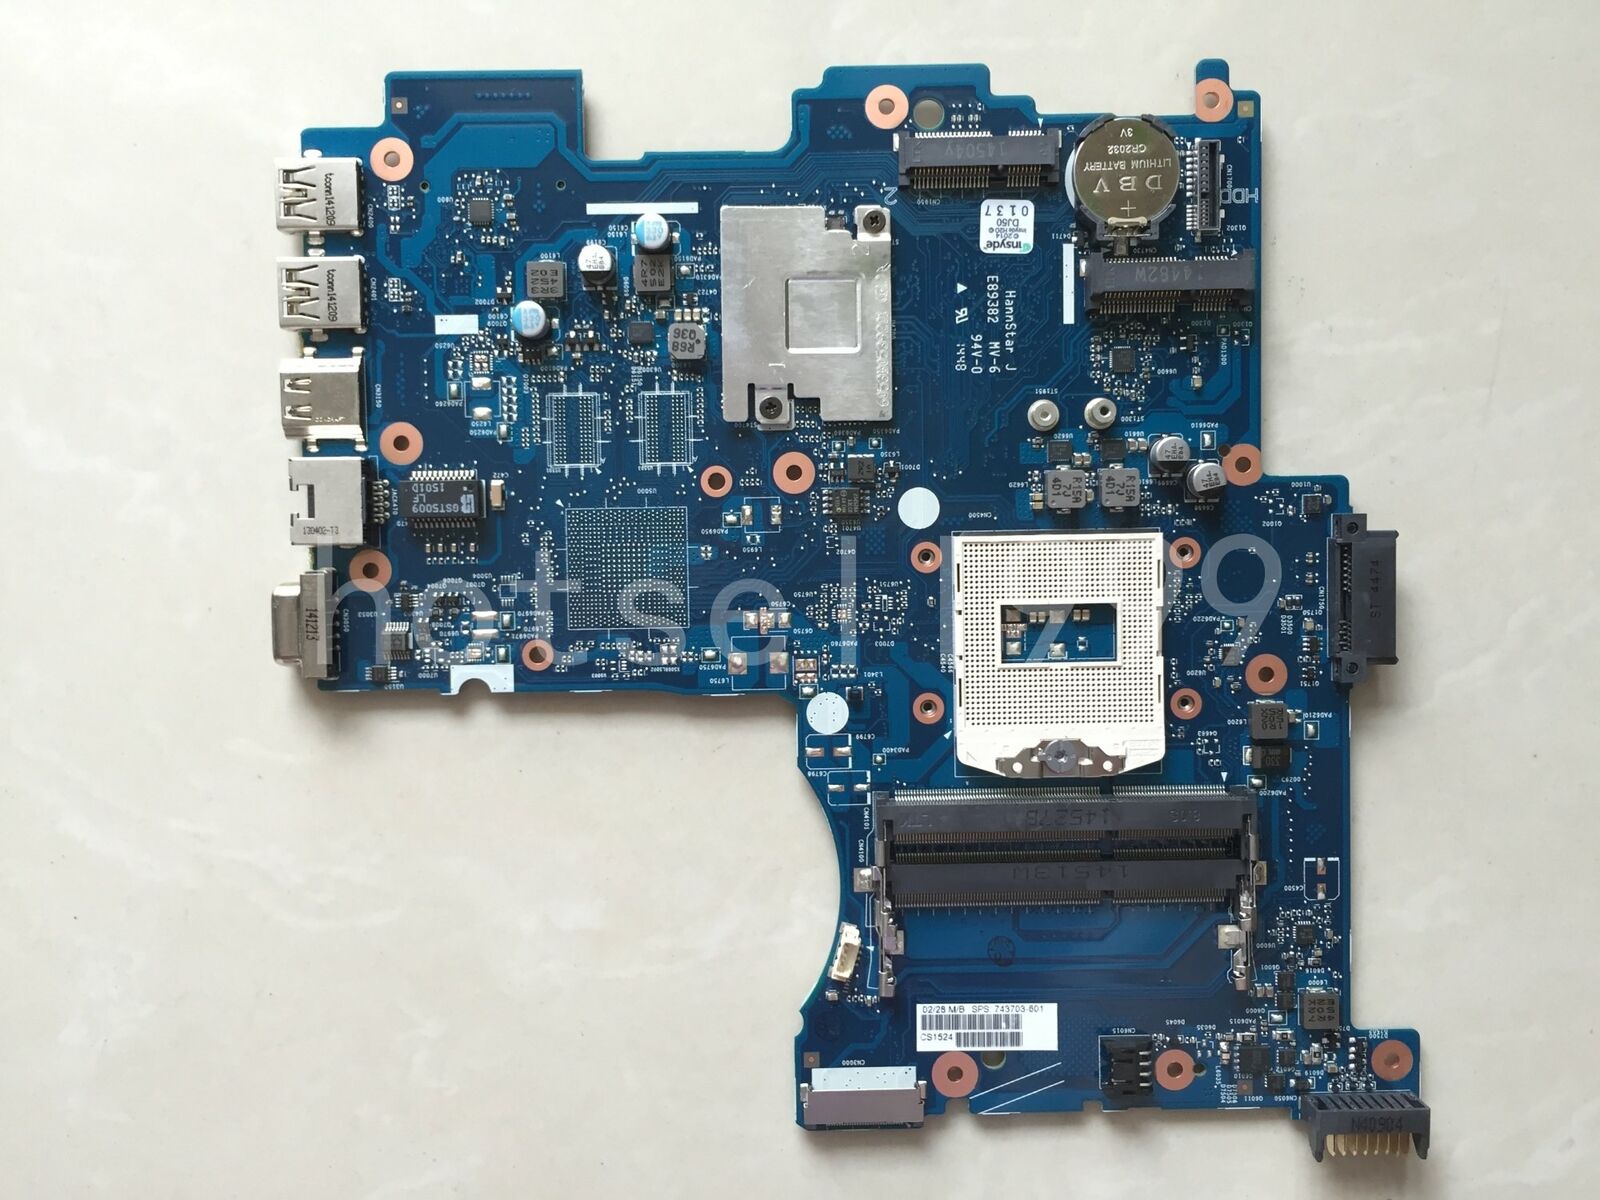 For HP 242 G2 Series Laptop PC Motherboard HM87 743703-601 Tested OK Brand: HP Number of Memory Slots: 2